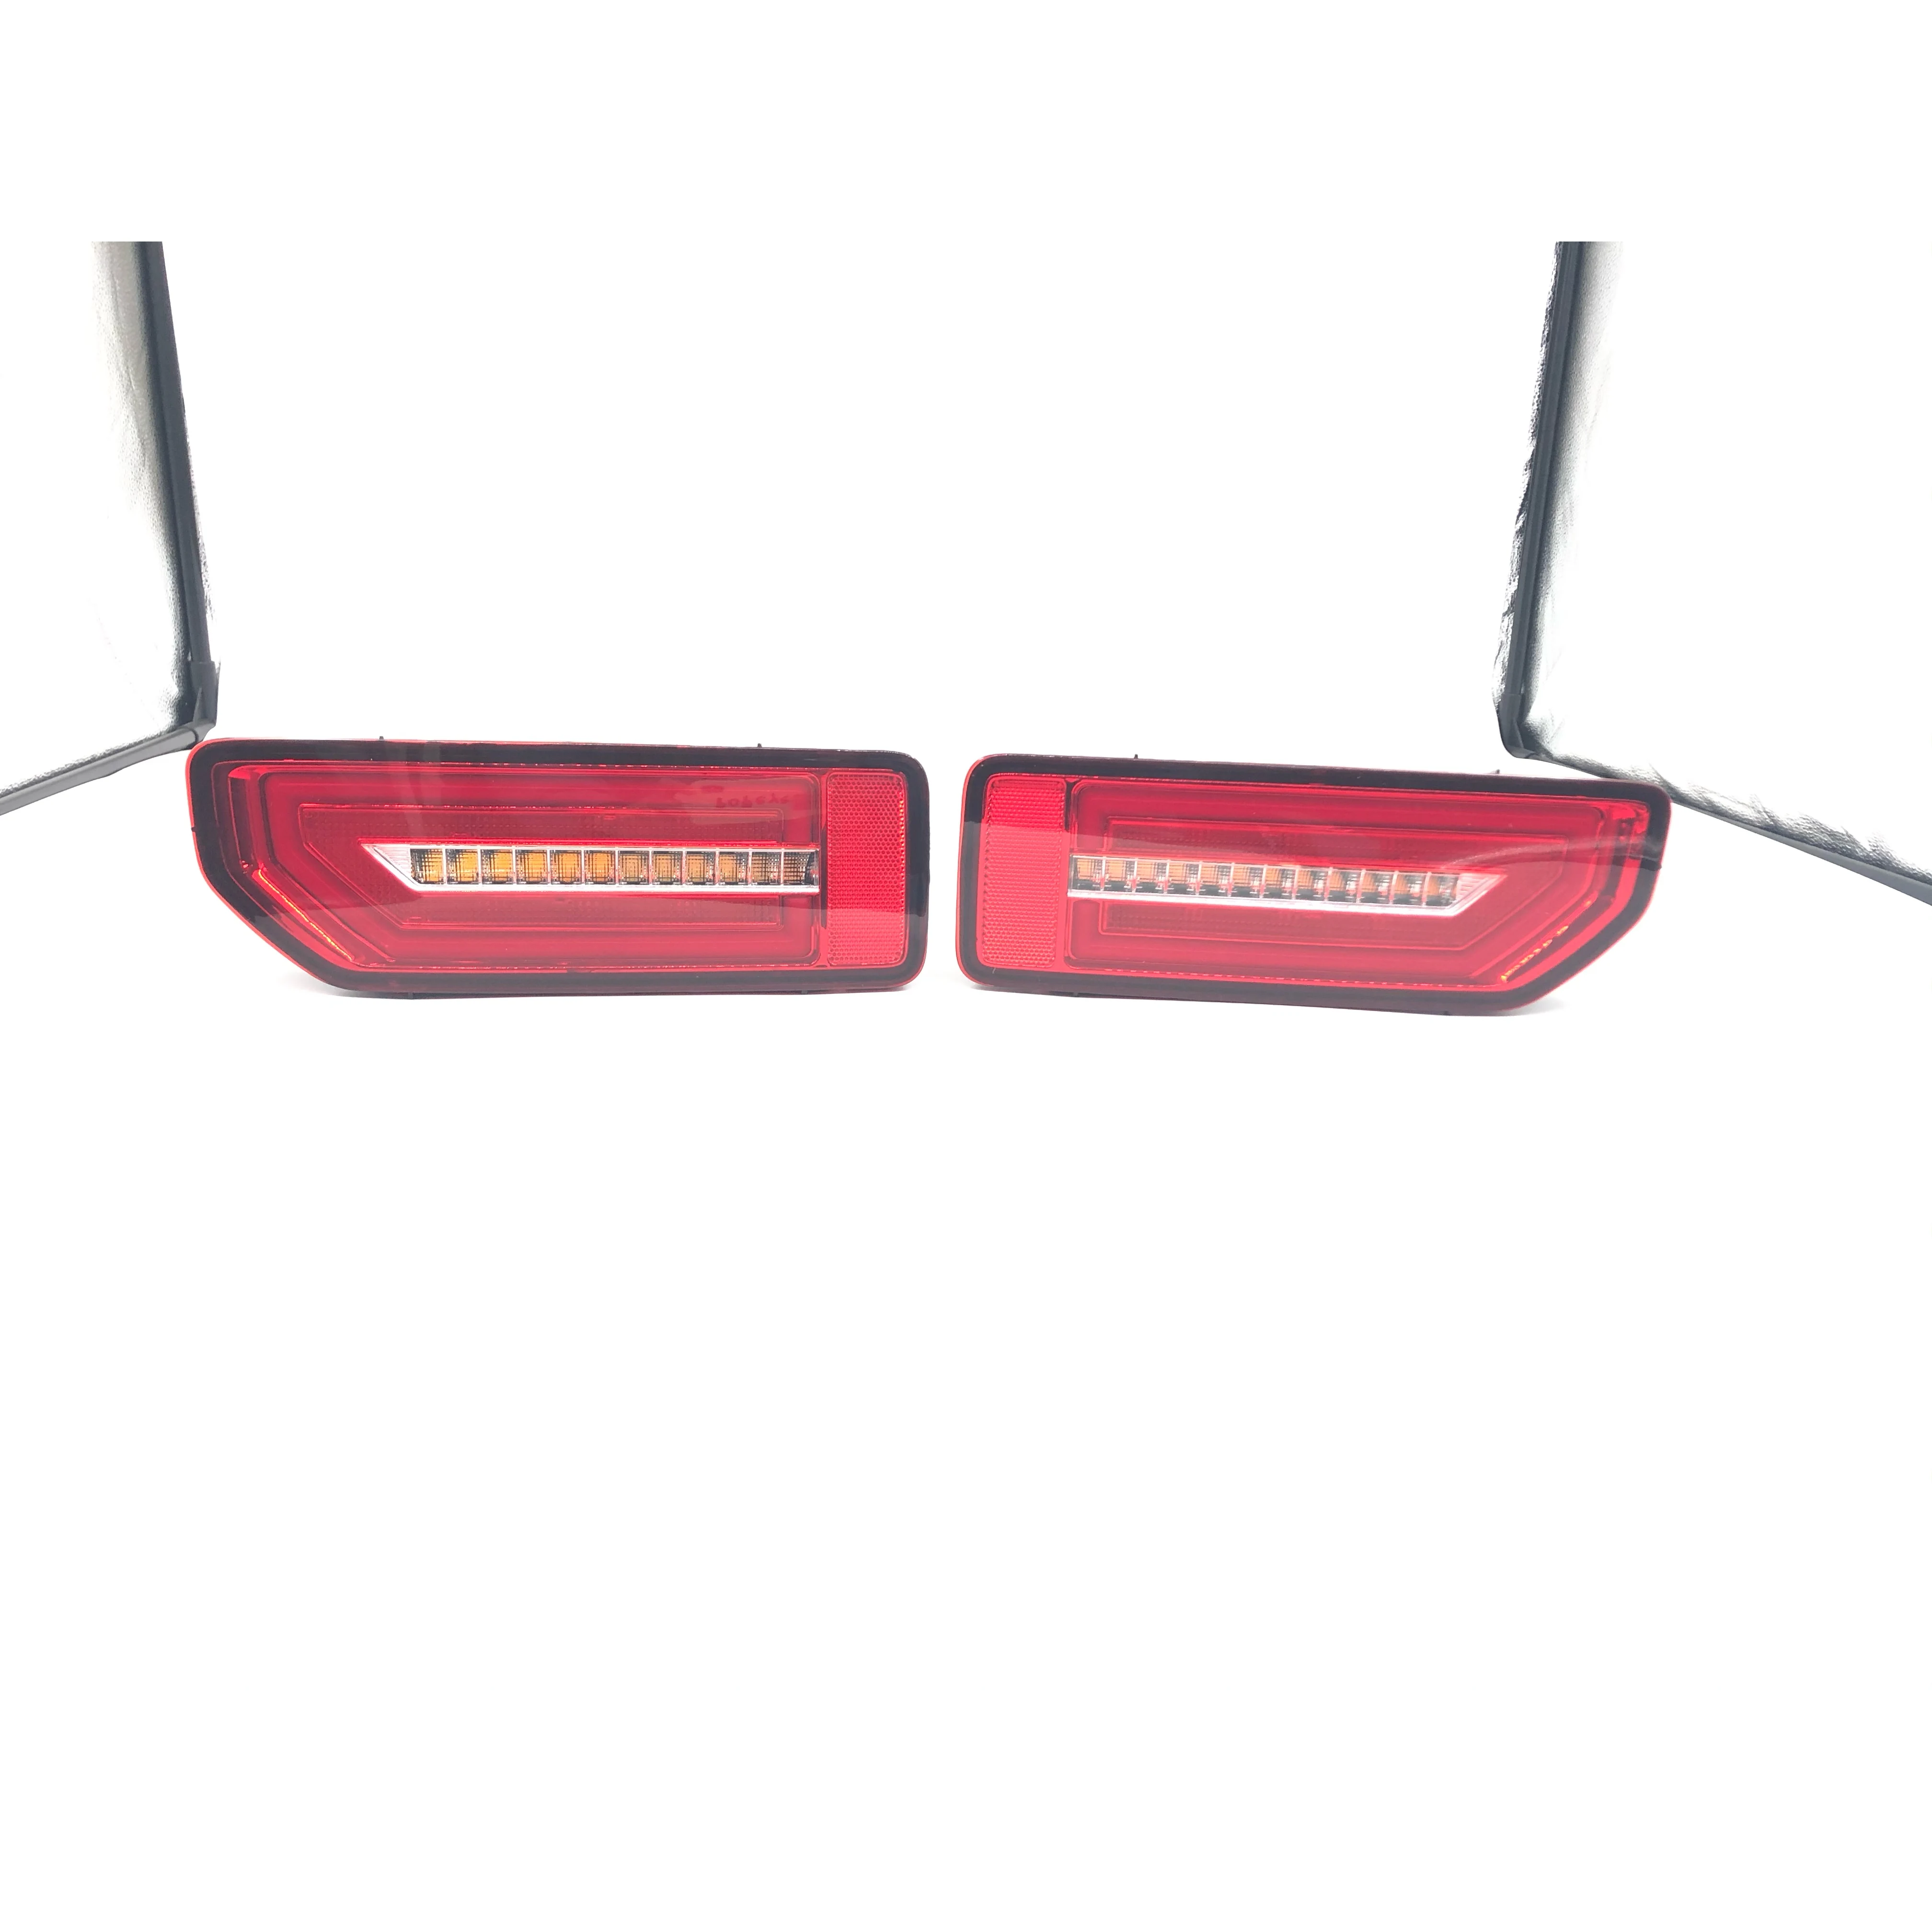 New product arrived reartail lamp forsuzuki Jimny stop lamp with the best quality ever